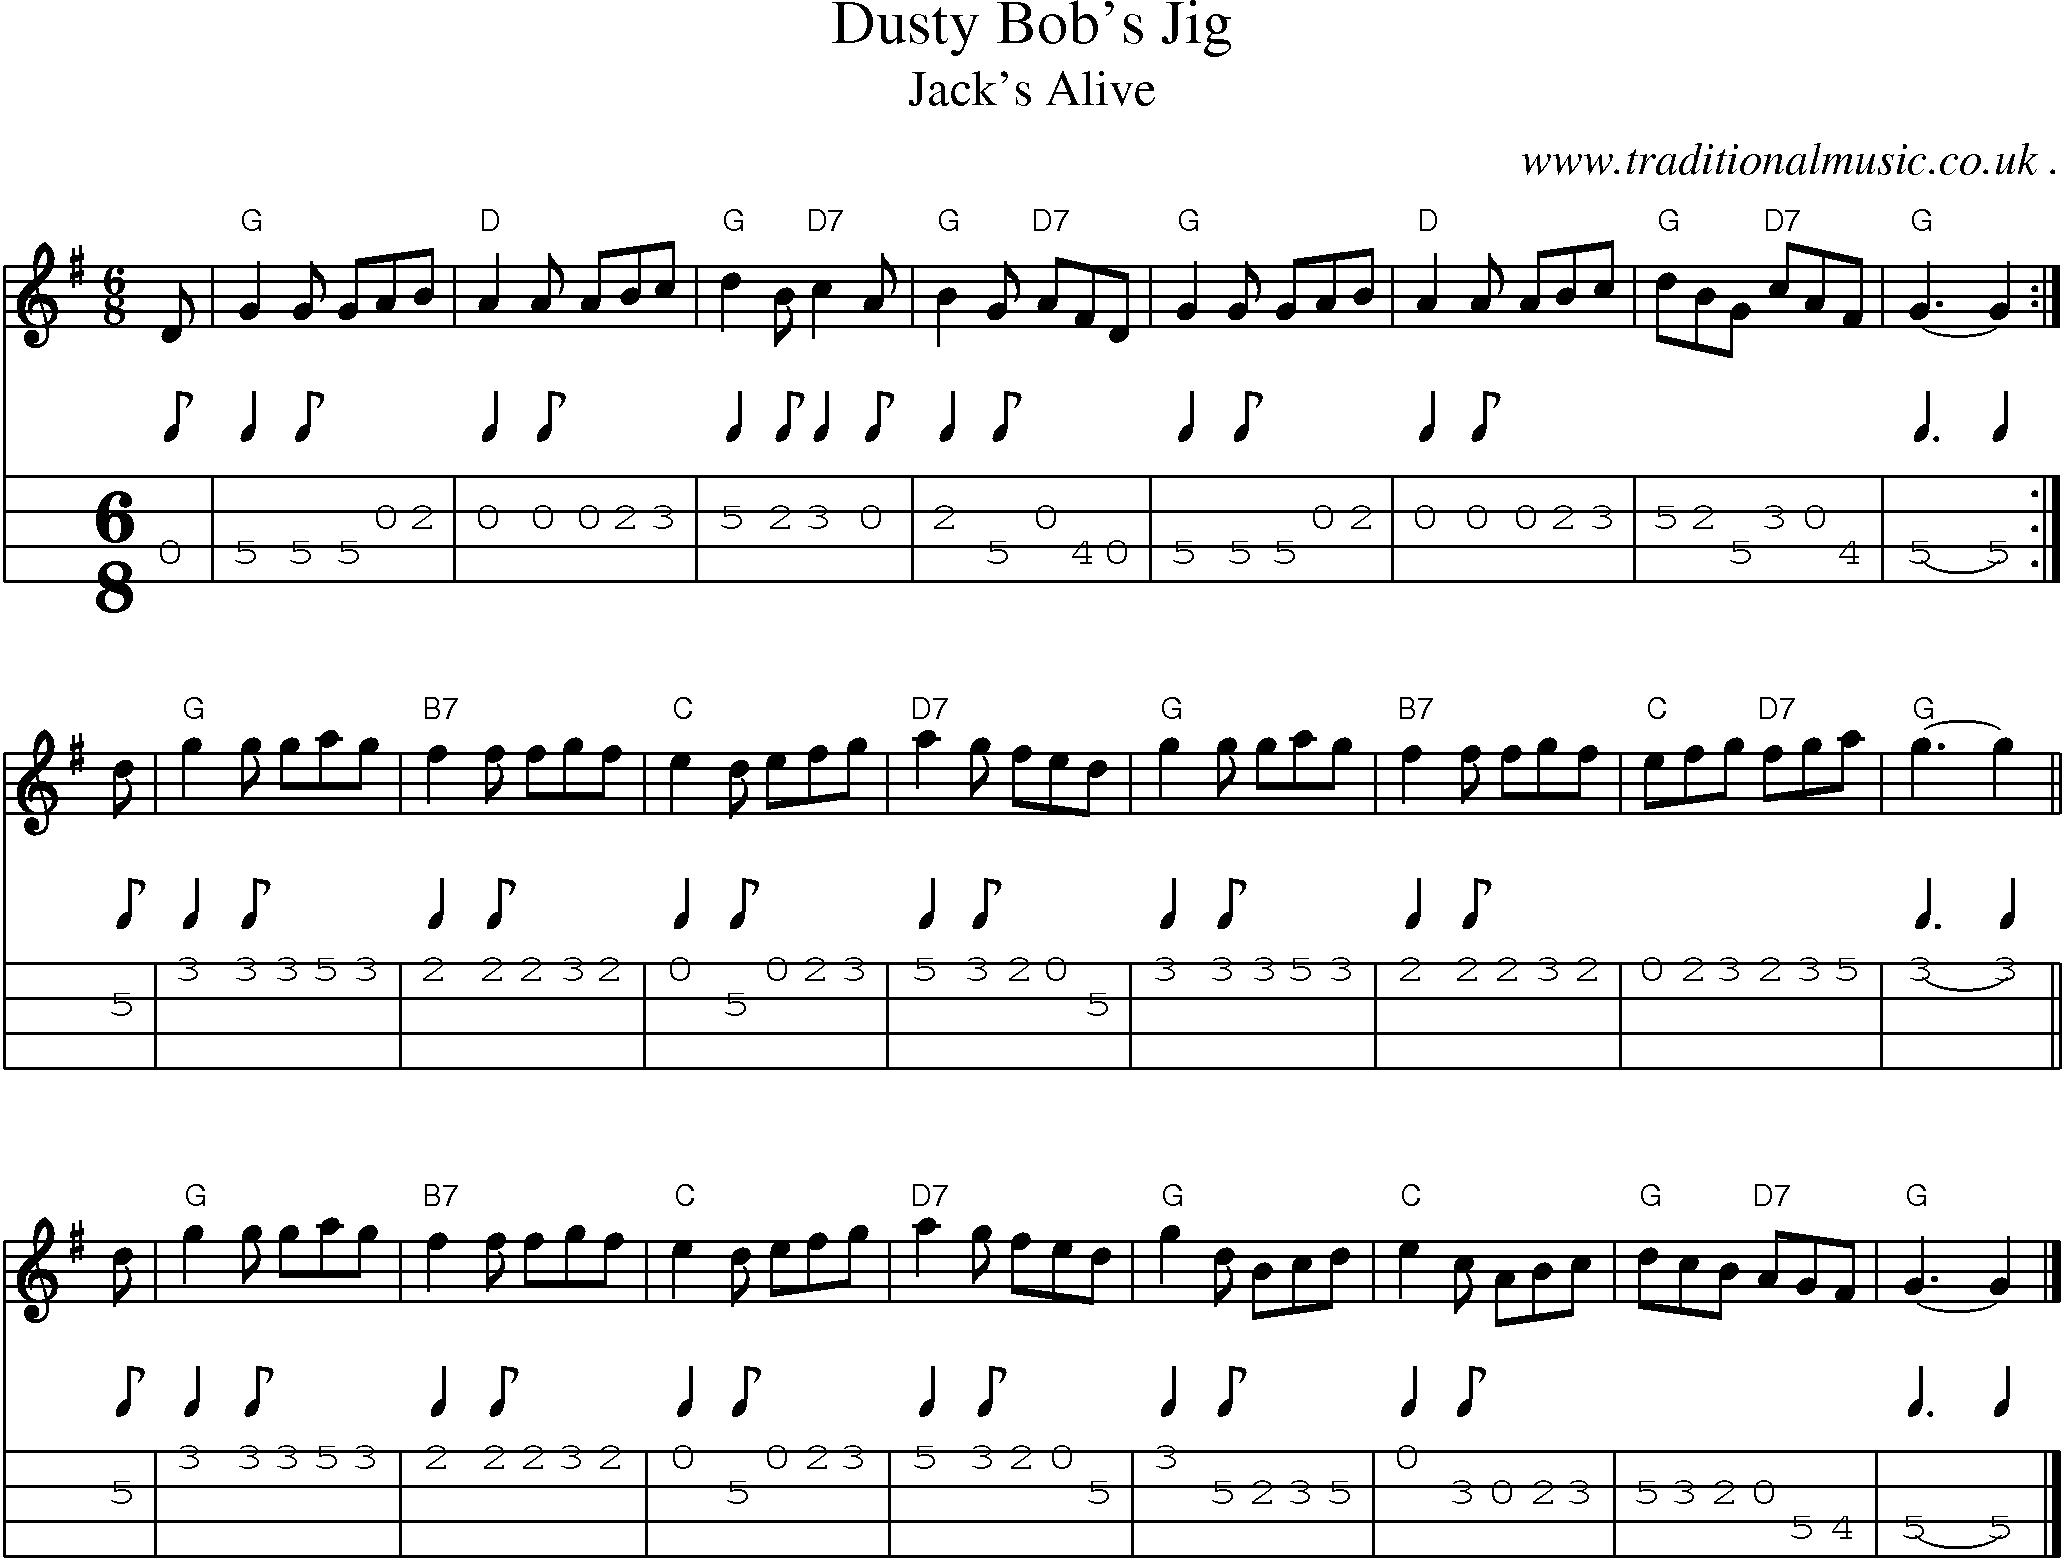 Sheet-music  score, Chords and Mandolin Tabs for Dusty Bobs Jig